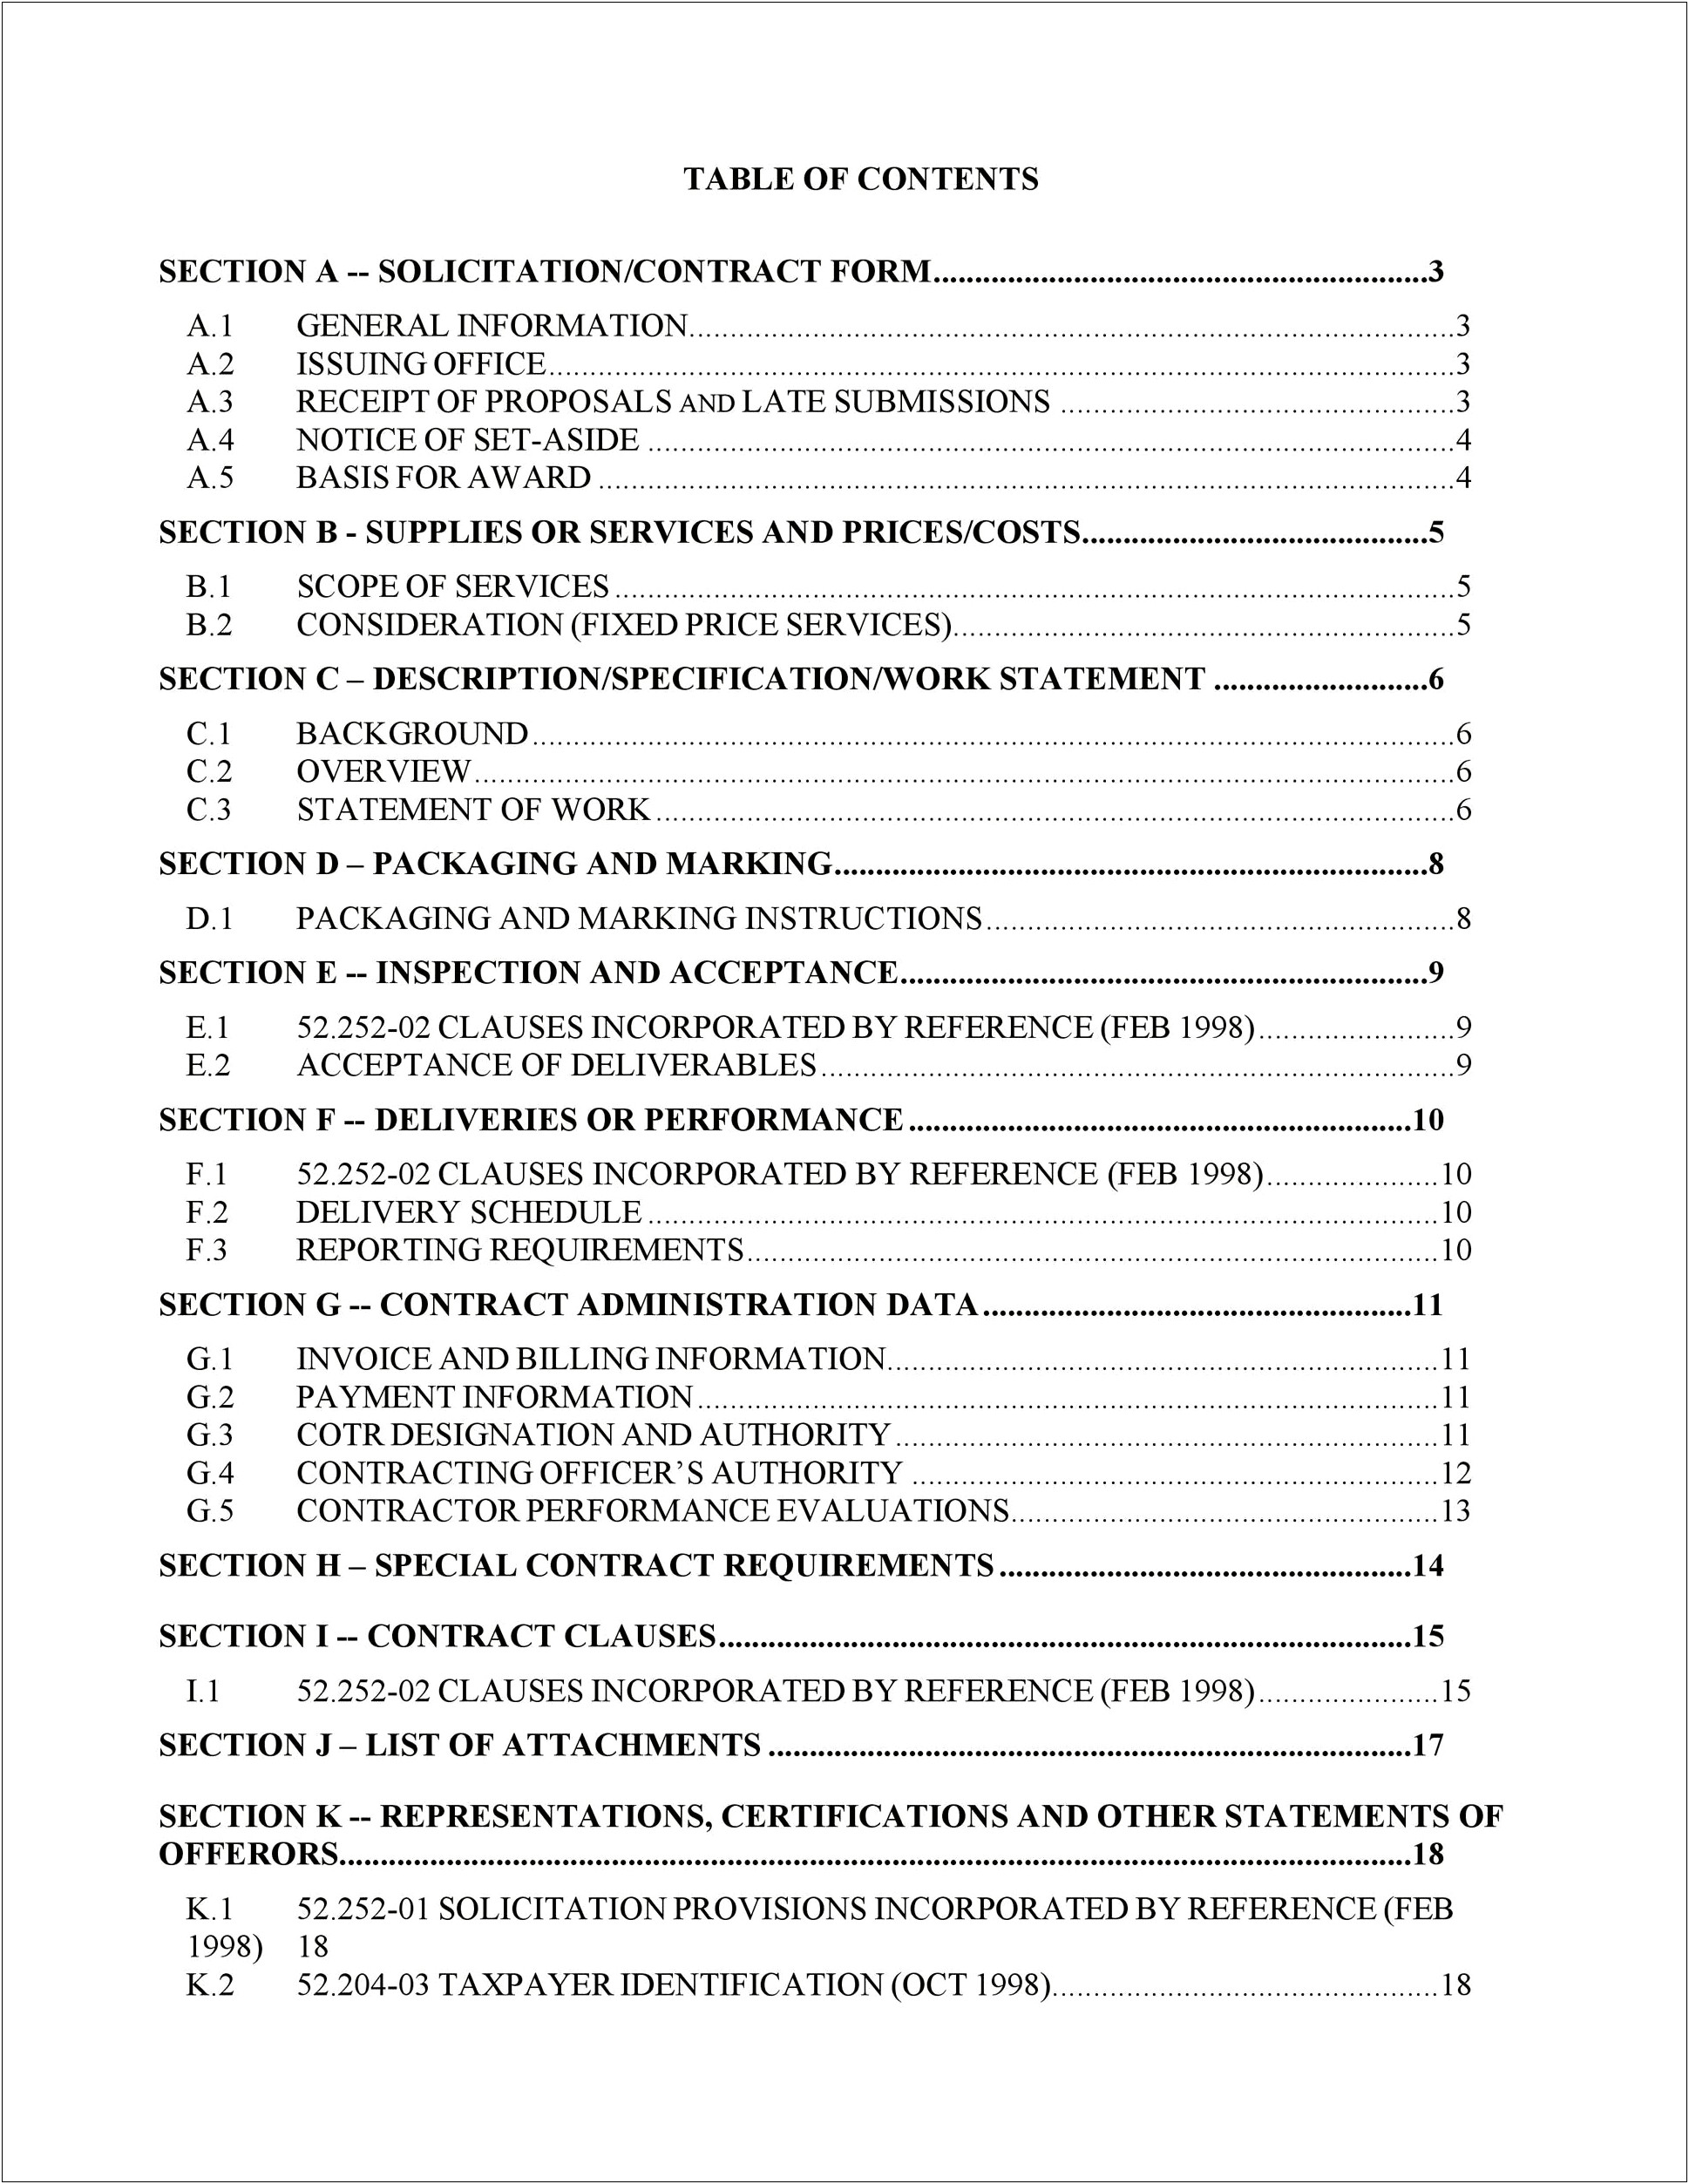 Template For Table Of Contents Word 2007